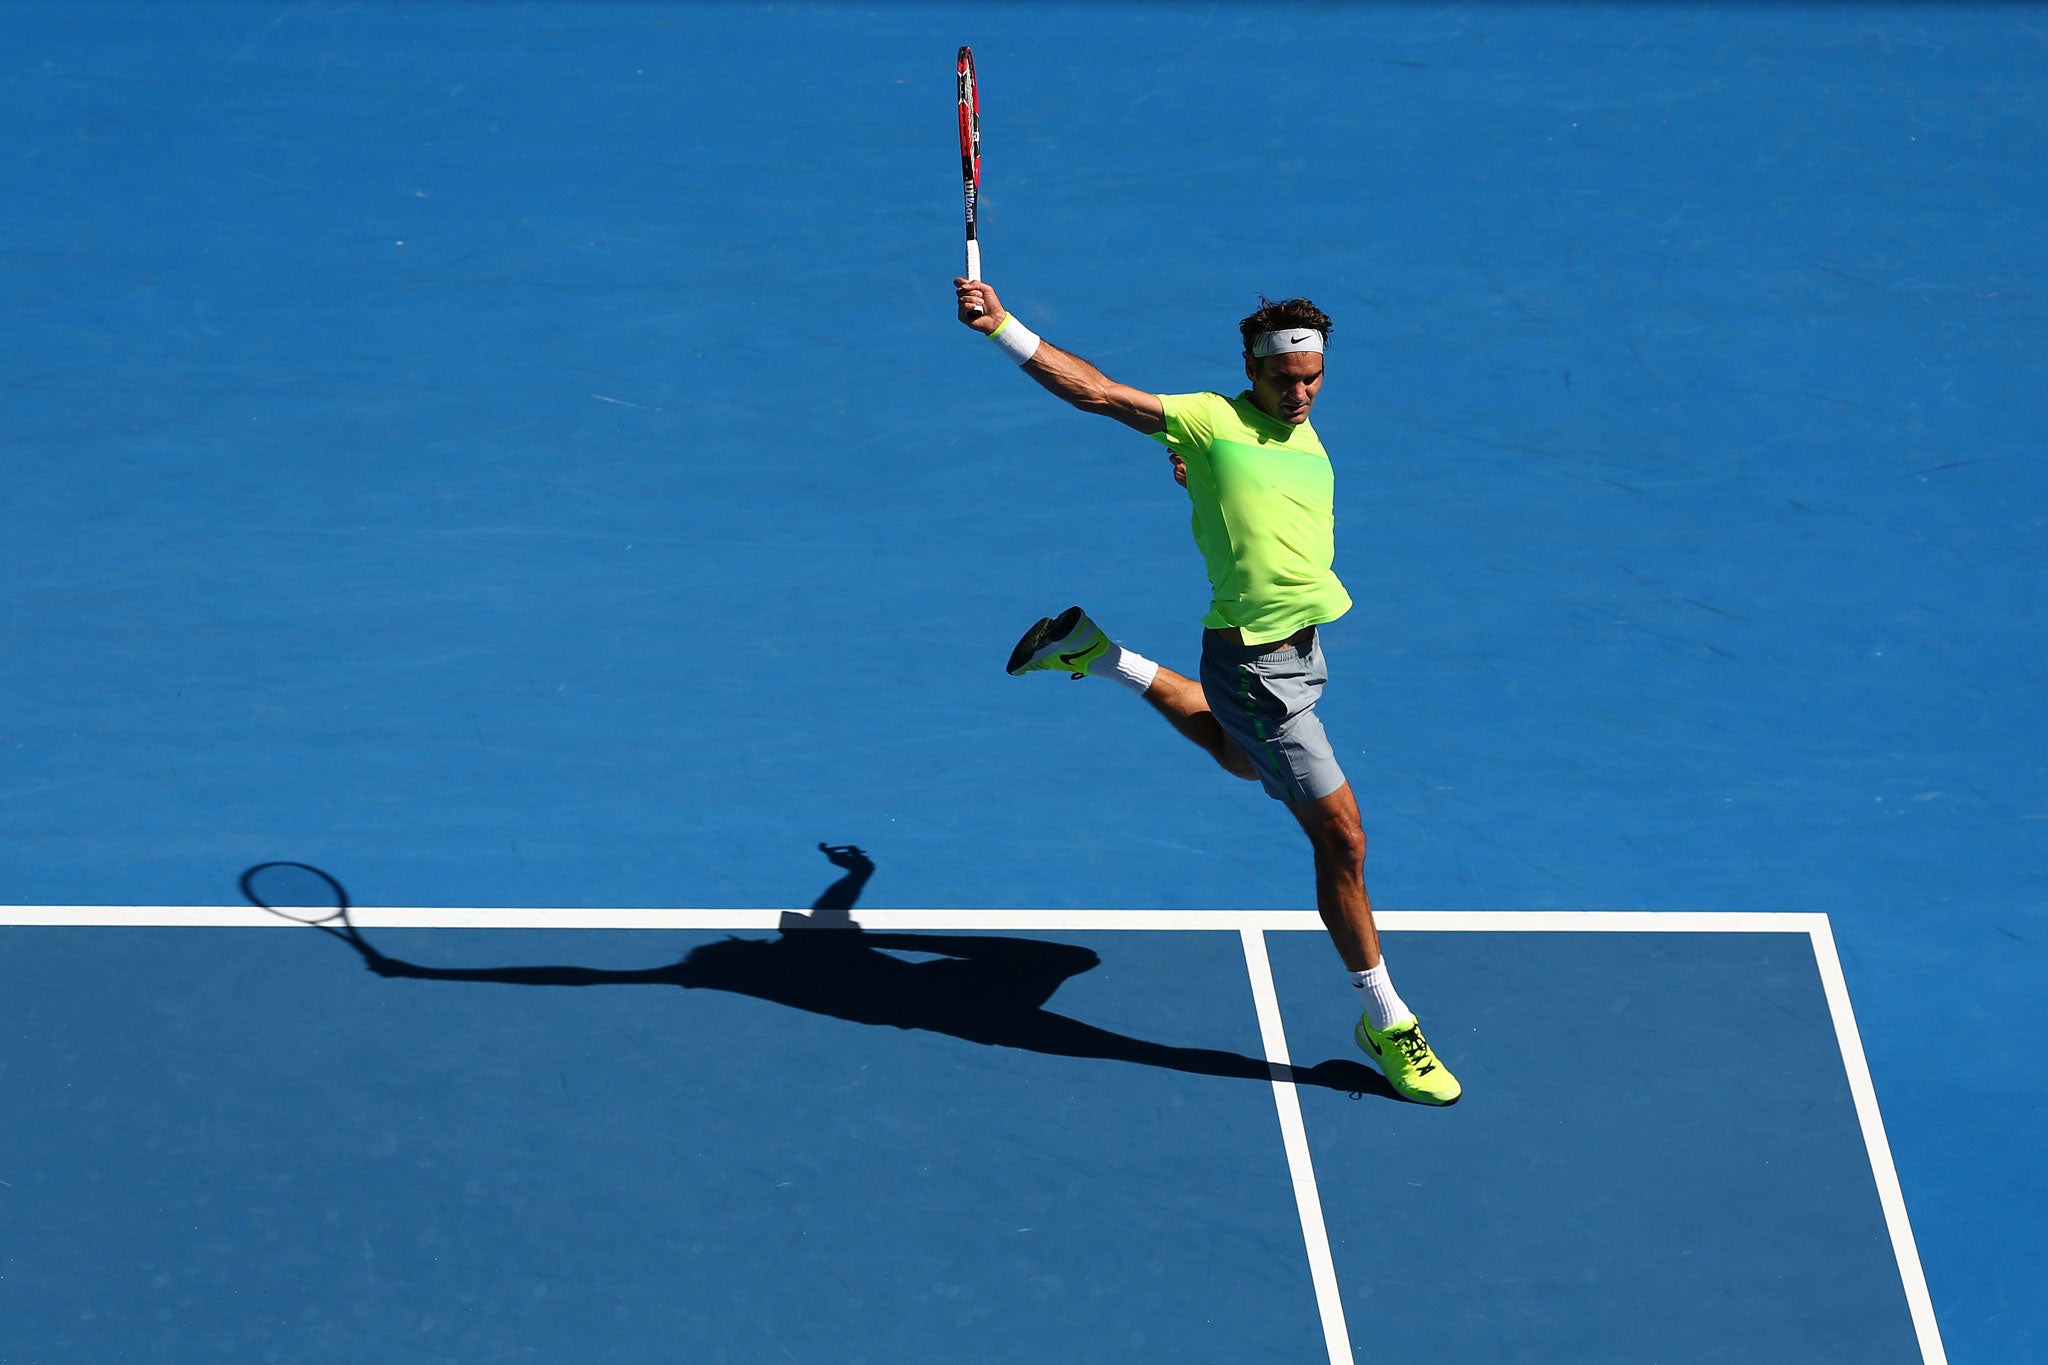 Roger Federer plays a backhand at the 2015 Australian Open in January